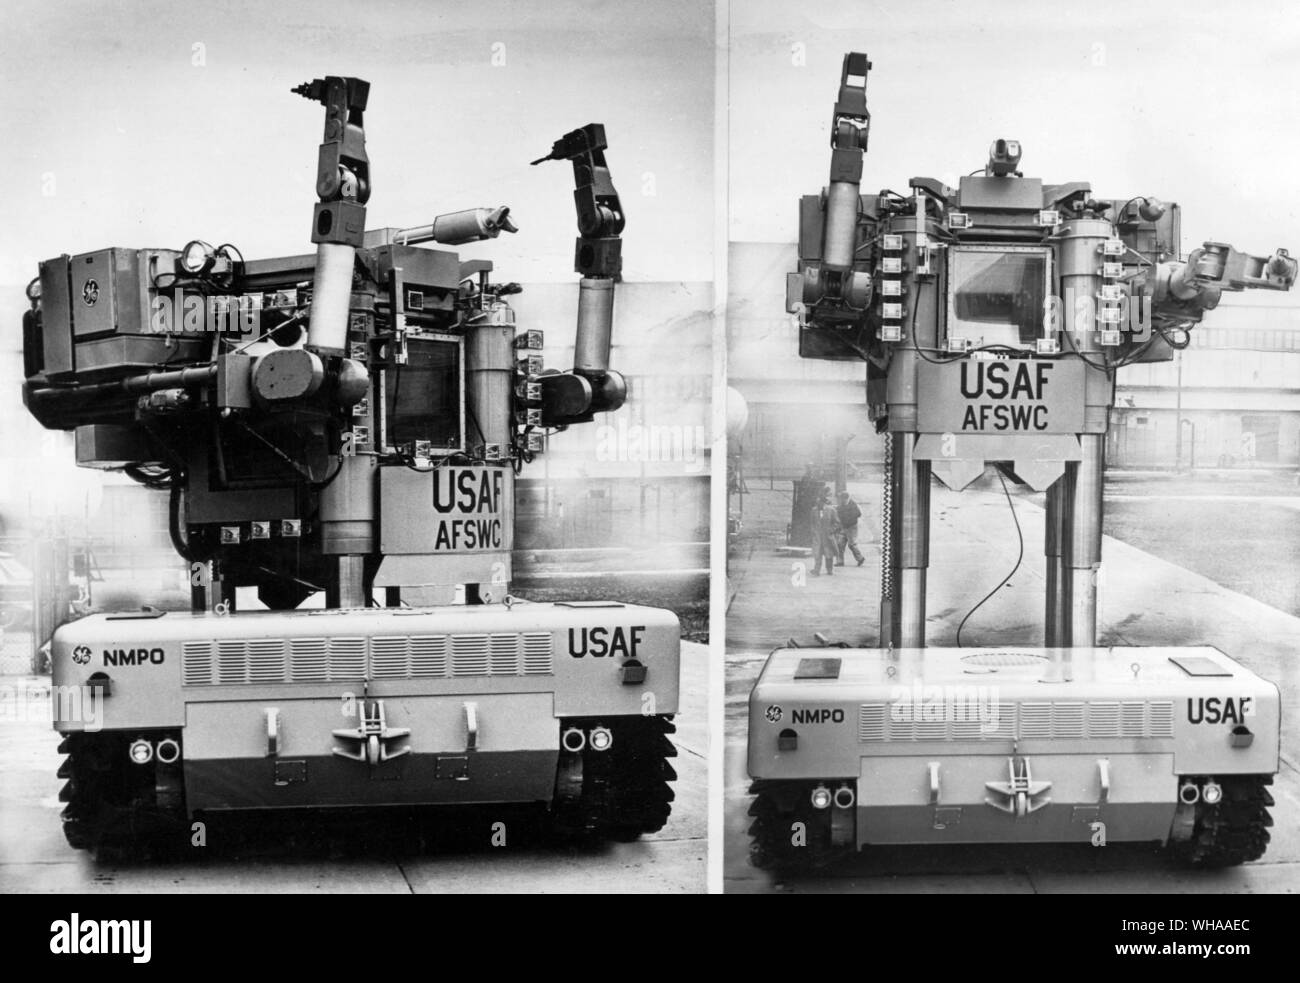 85 ton robot will handle radioactive materials. This 85 ton robot named Beetle is being tested for work in 'hot' nuclear areas by the US Atomic Energy Commission and the Air Force in the State of Nevada. The operator, protected by thick lead and glass shields turns his cab left and raises it 25 feet above the ground. The mechanical arms can carry parts and perform intricate operations on nuclear power and propulsion systems Stock Photo